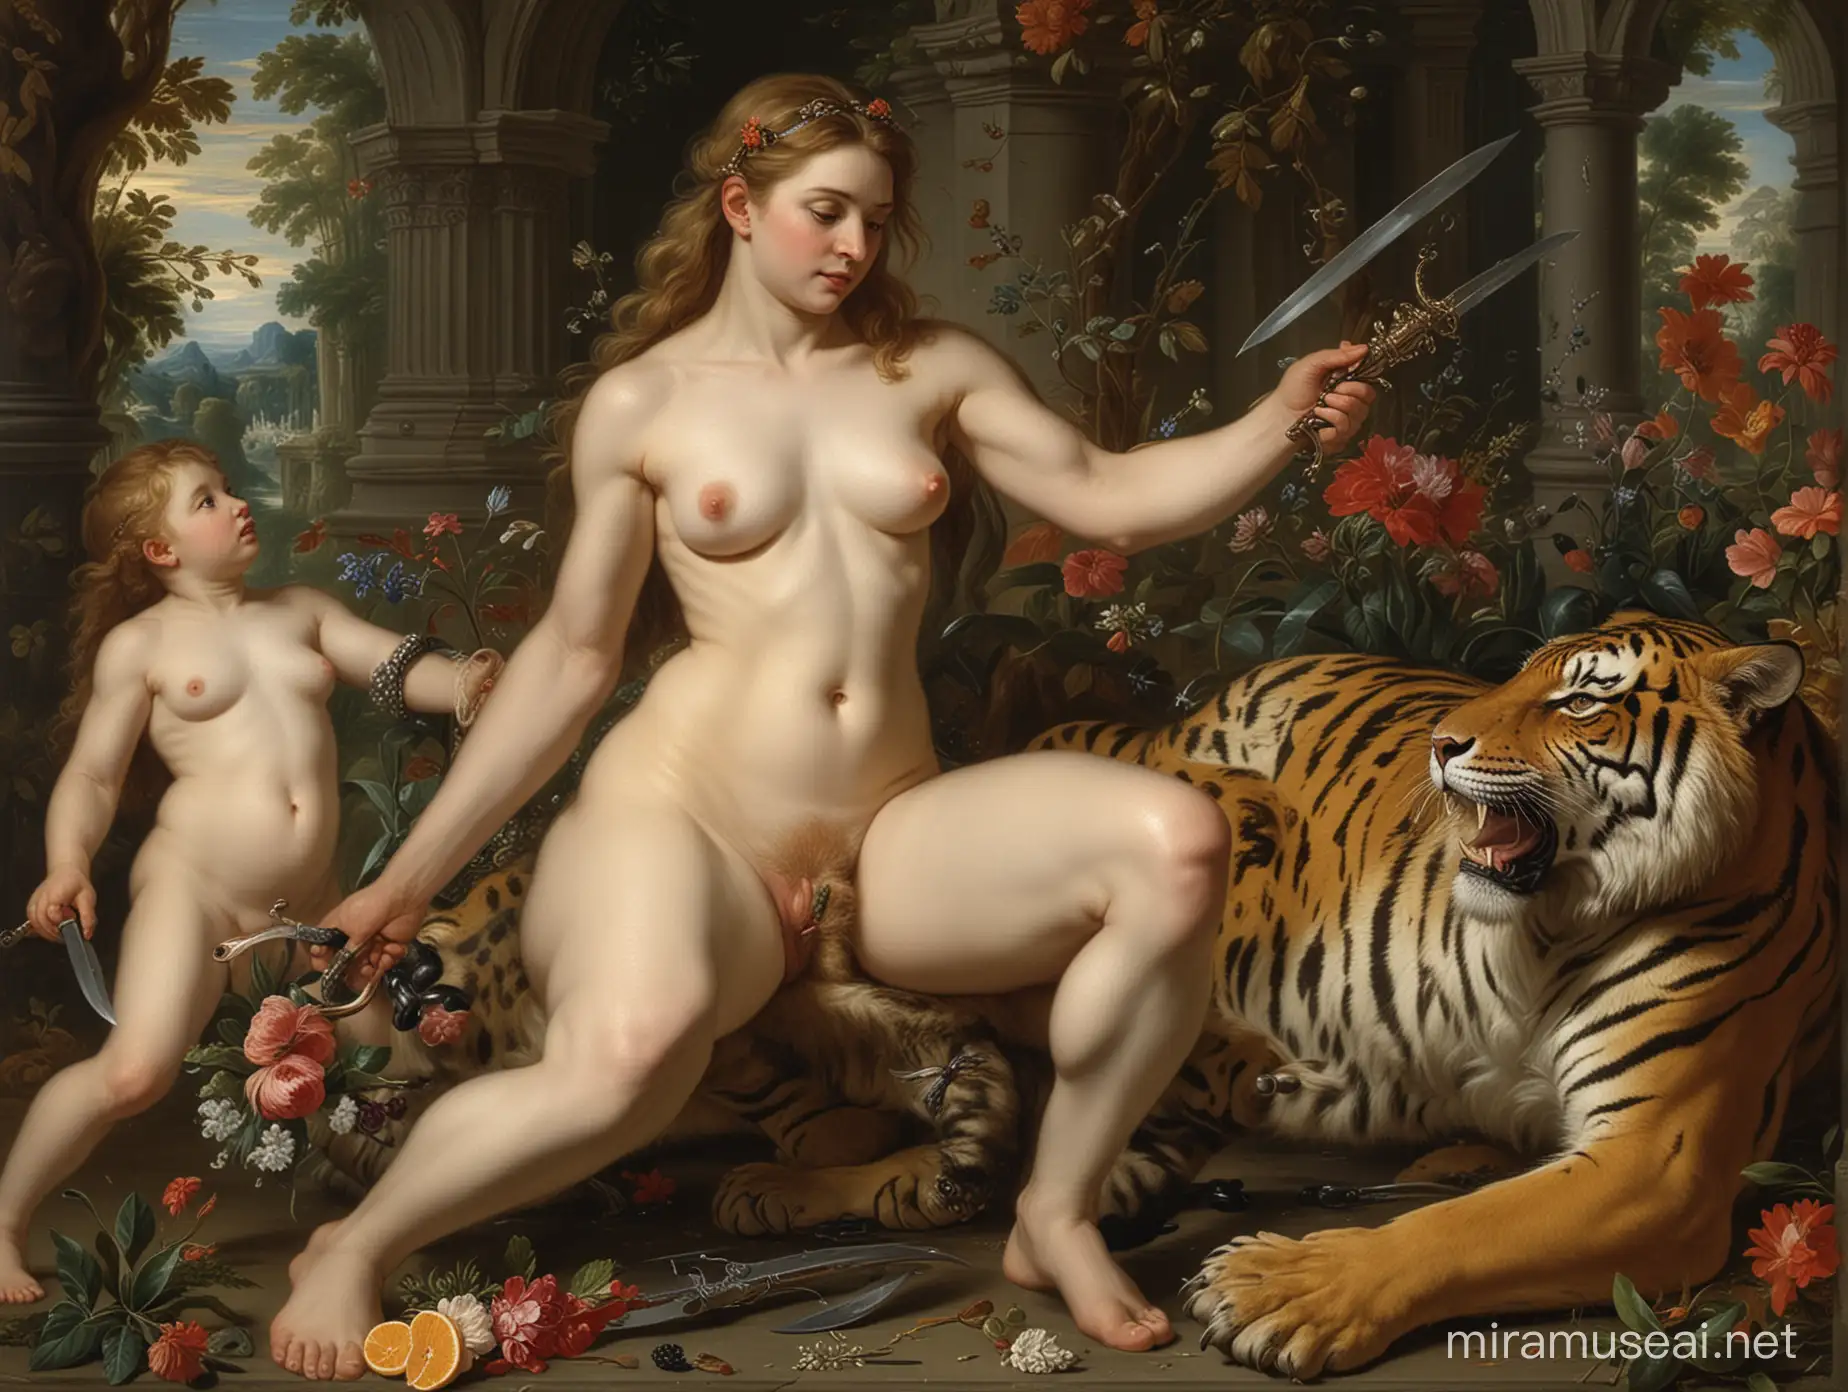 Rubens Style Art Dramatic Scene of Young Woman Confronting Tiger Amidst Flowers and Fruit